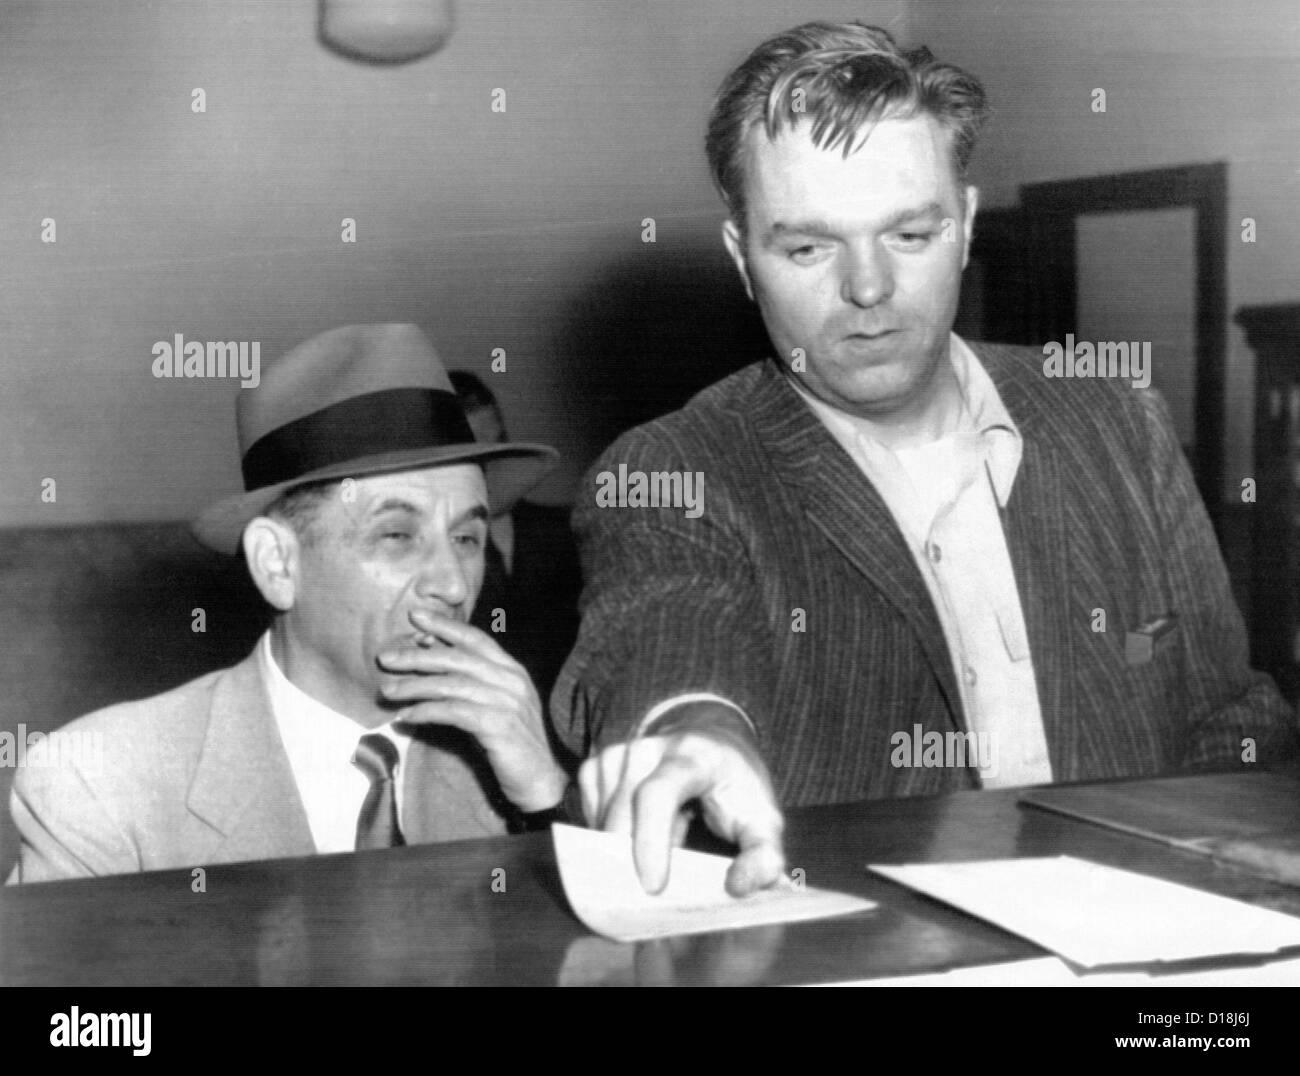 Meyer Lansky is booked on vagrancy charges at the West 54th Street police station in Manhattan. Lansky was arrested as he Stock Photo